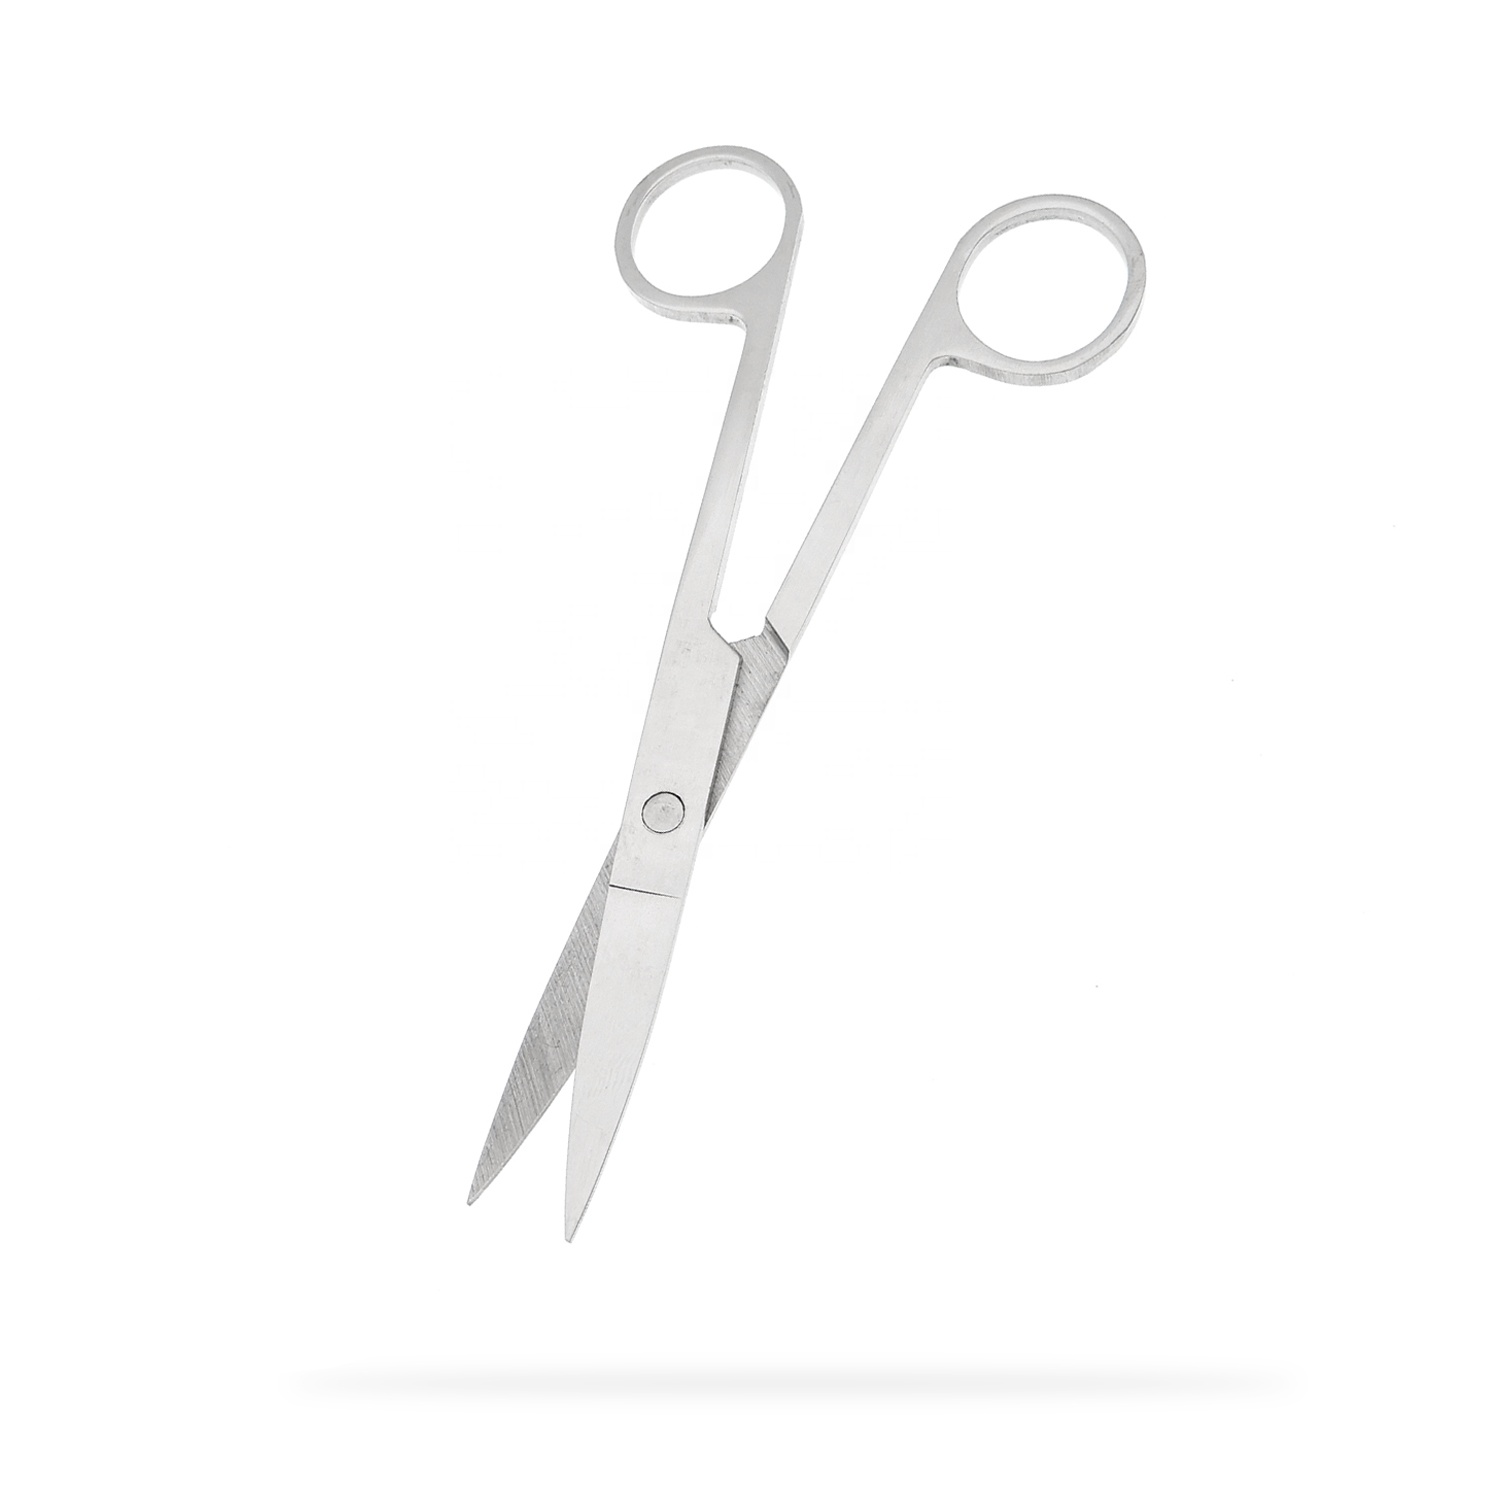 BS115 Small Stainless Steel Scissors, Safety thin Emergency Kit Bandage Shears Clippers HouseHold Home Improvement Sharp EasyUse